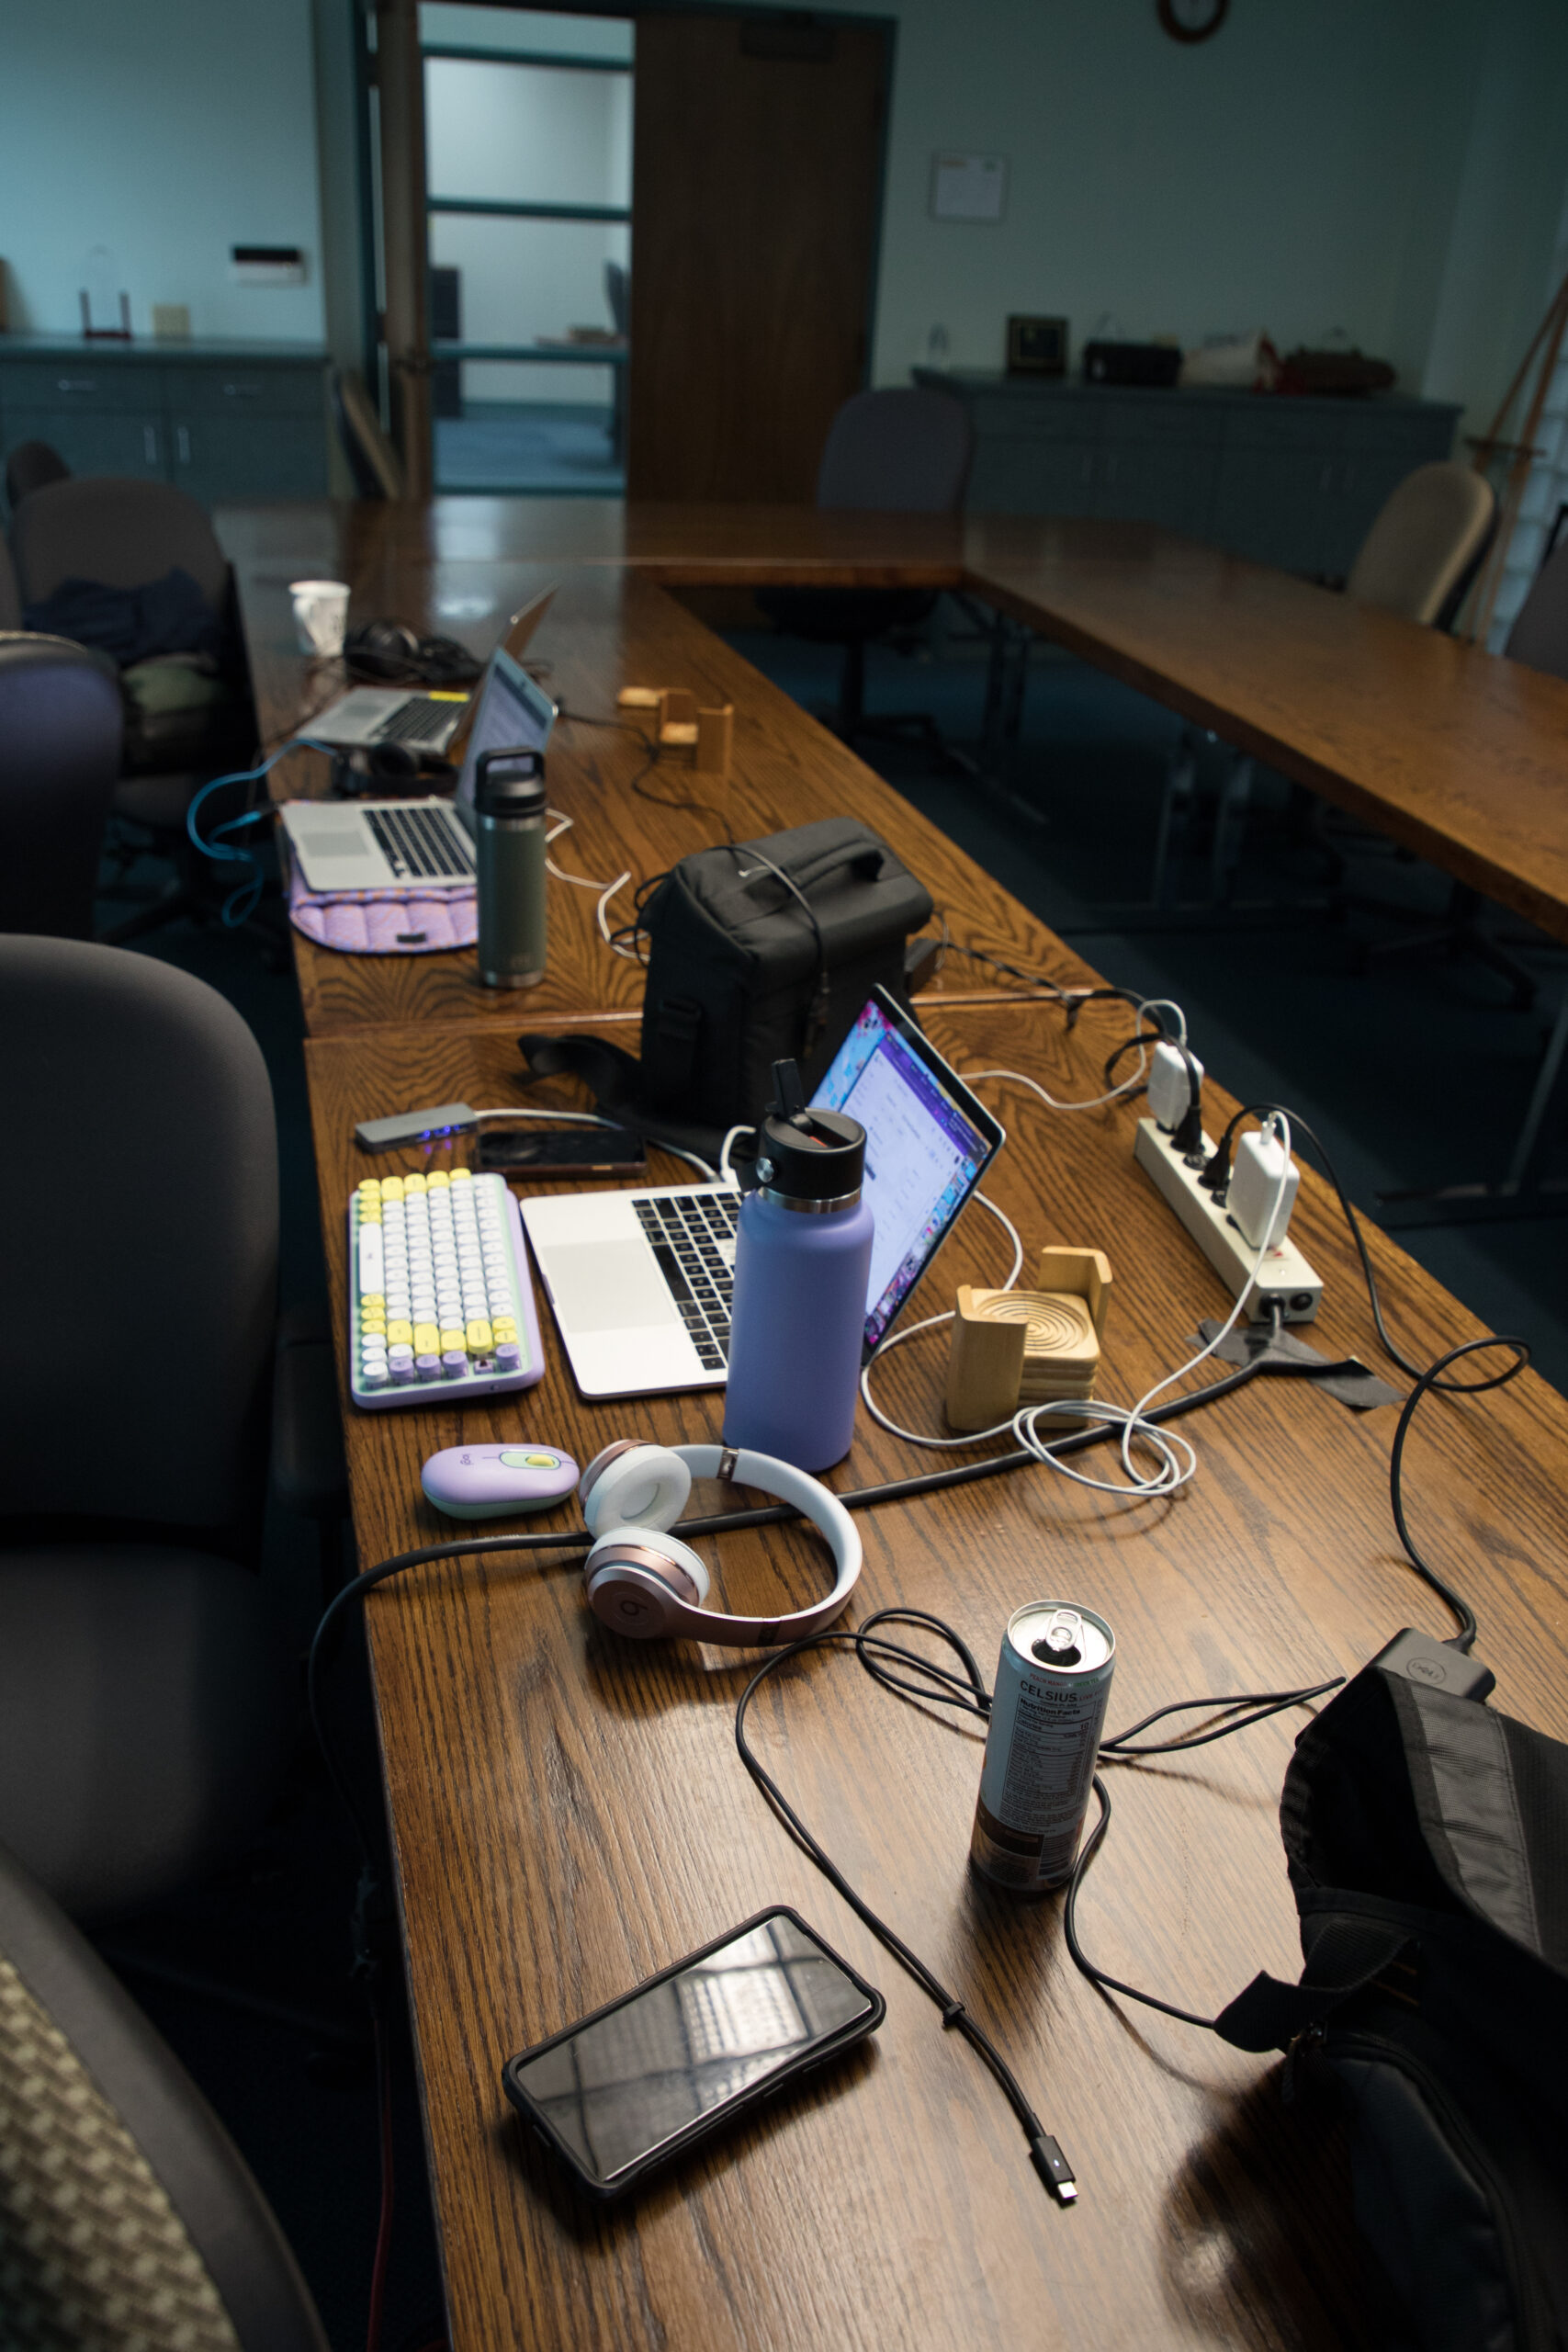 Laptops, cords, headphones and drinks are on a brown table.